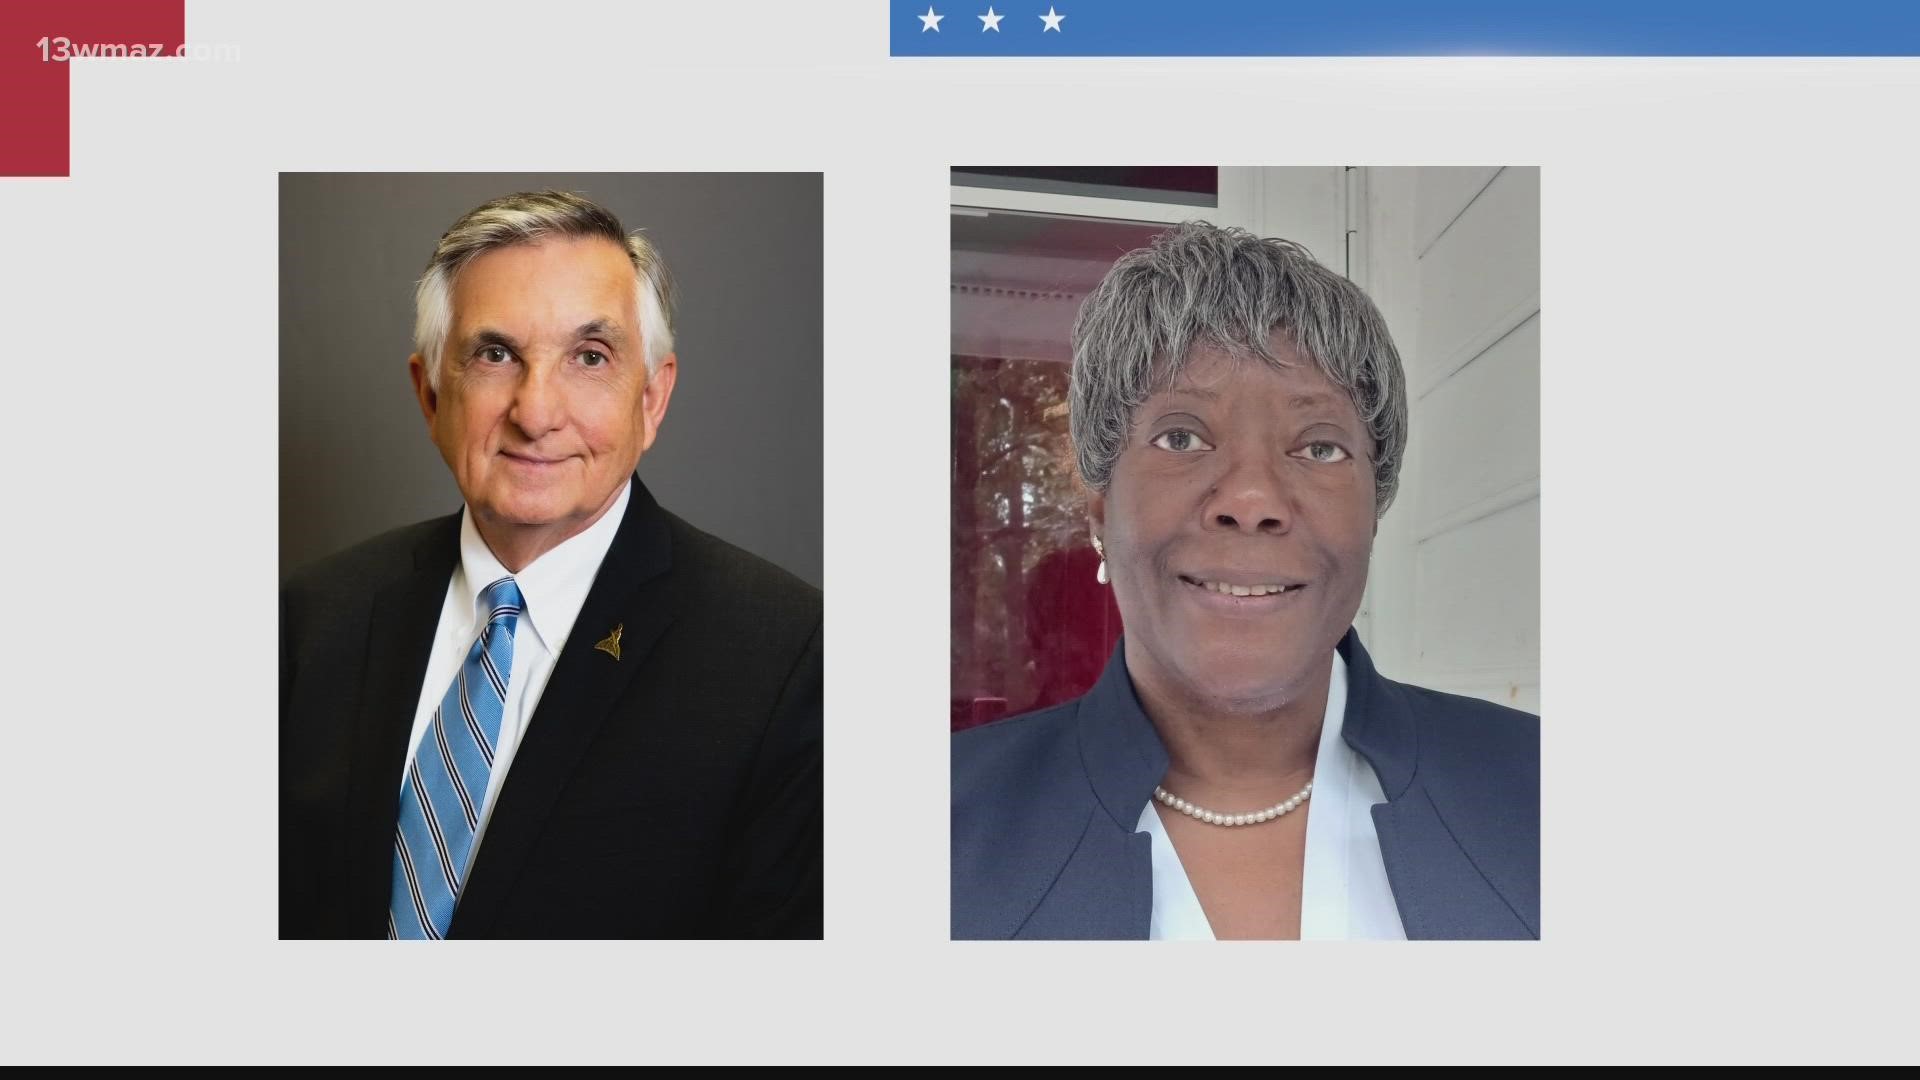 Dale Washburn is the Republican candidate, and Nettie B. Conner is the Democratic candidate.